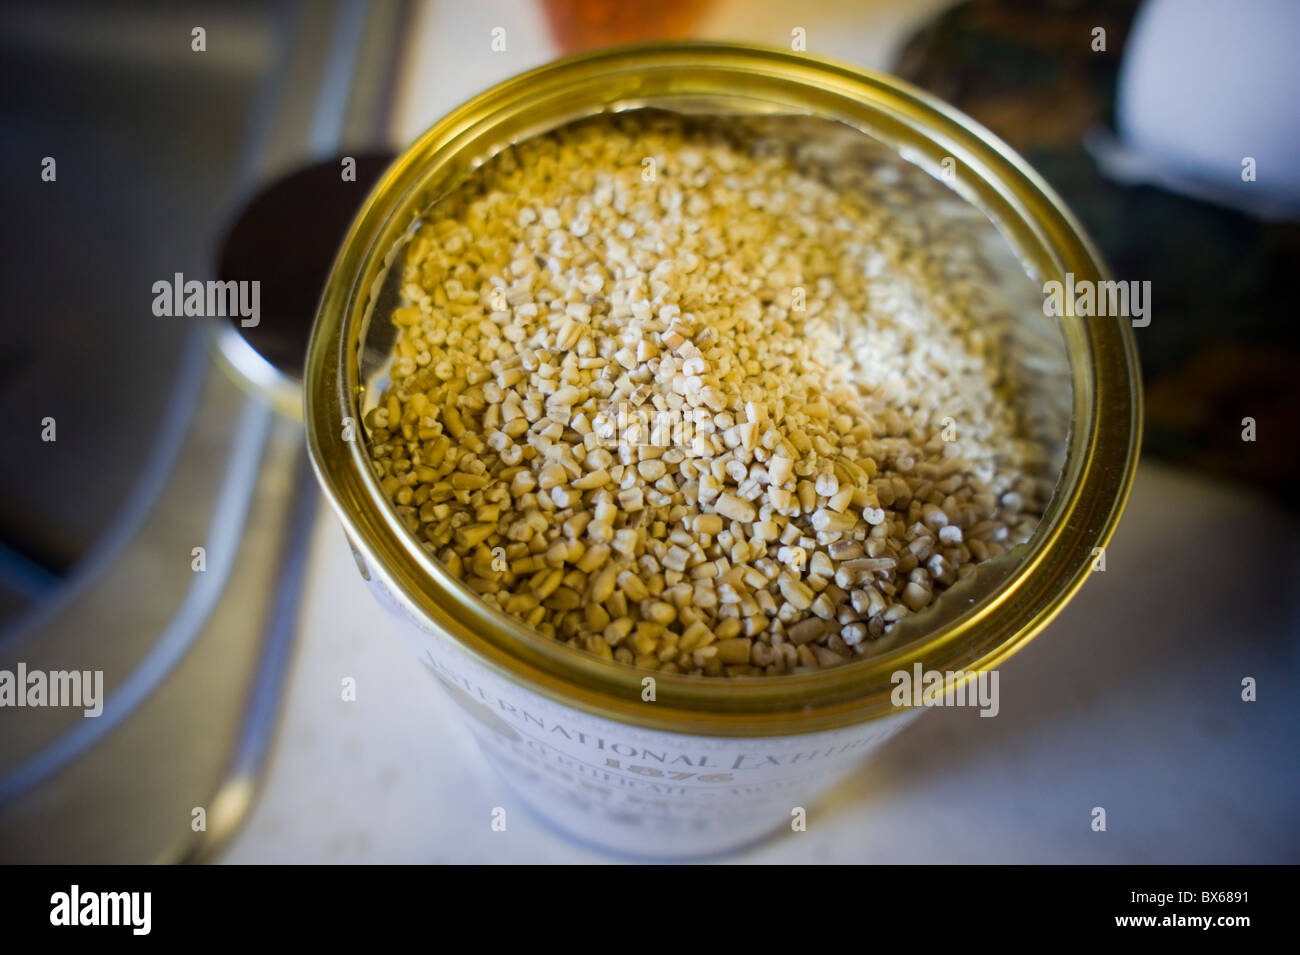 A container of John McCann Steel Cut Oats, imported from Ireland Stock Photo